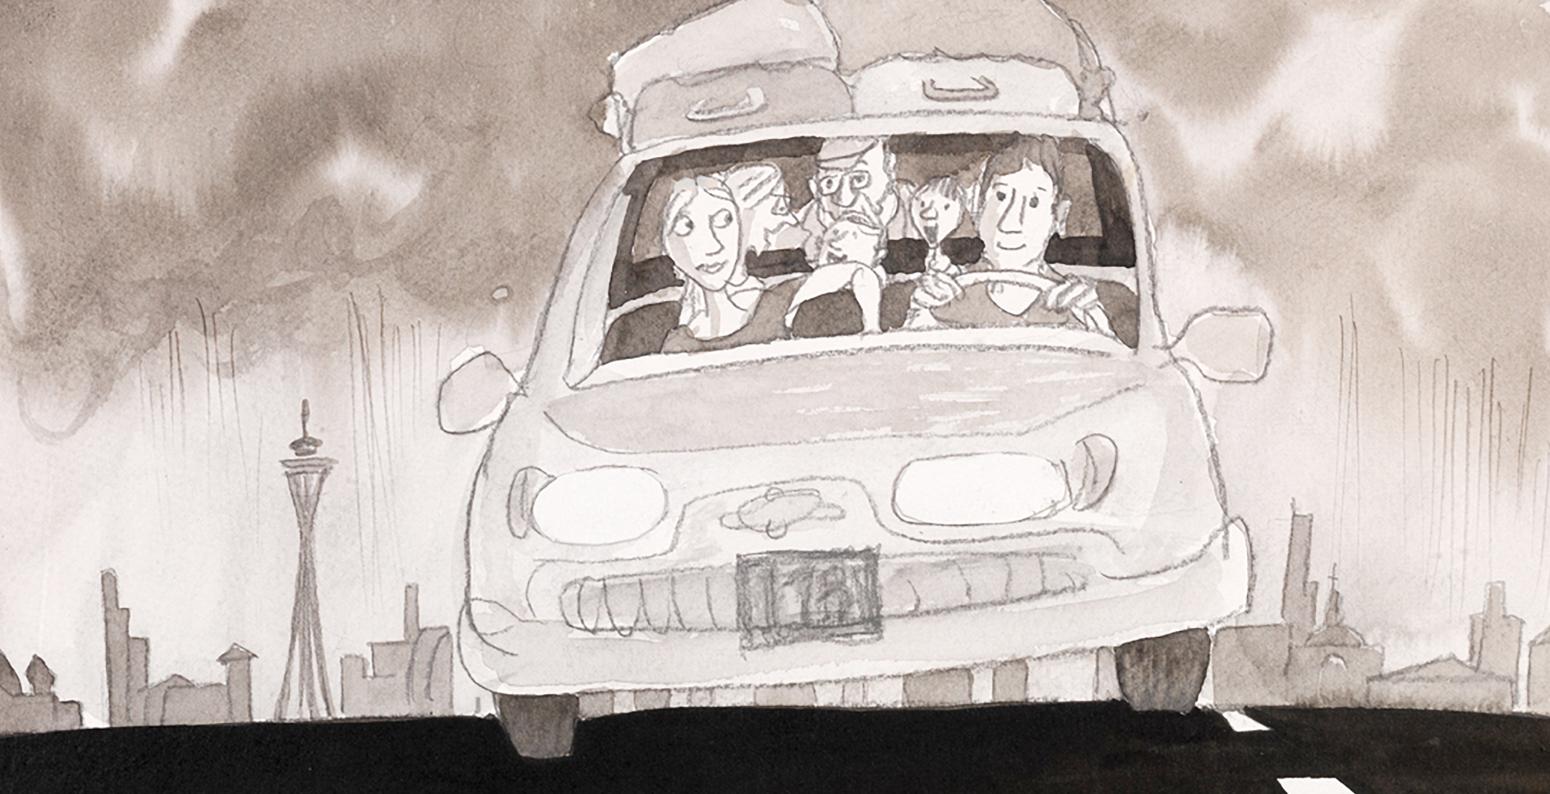 Illustration of family in car on road. 